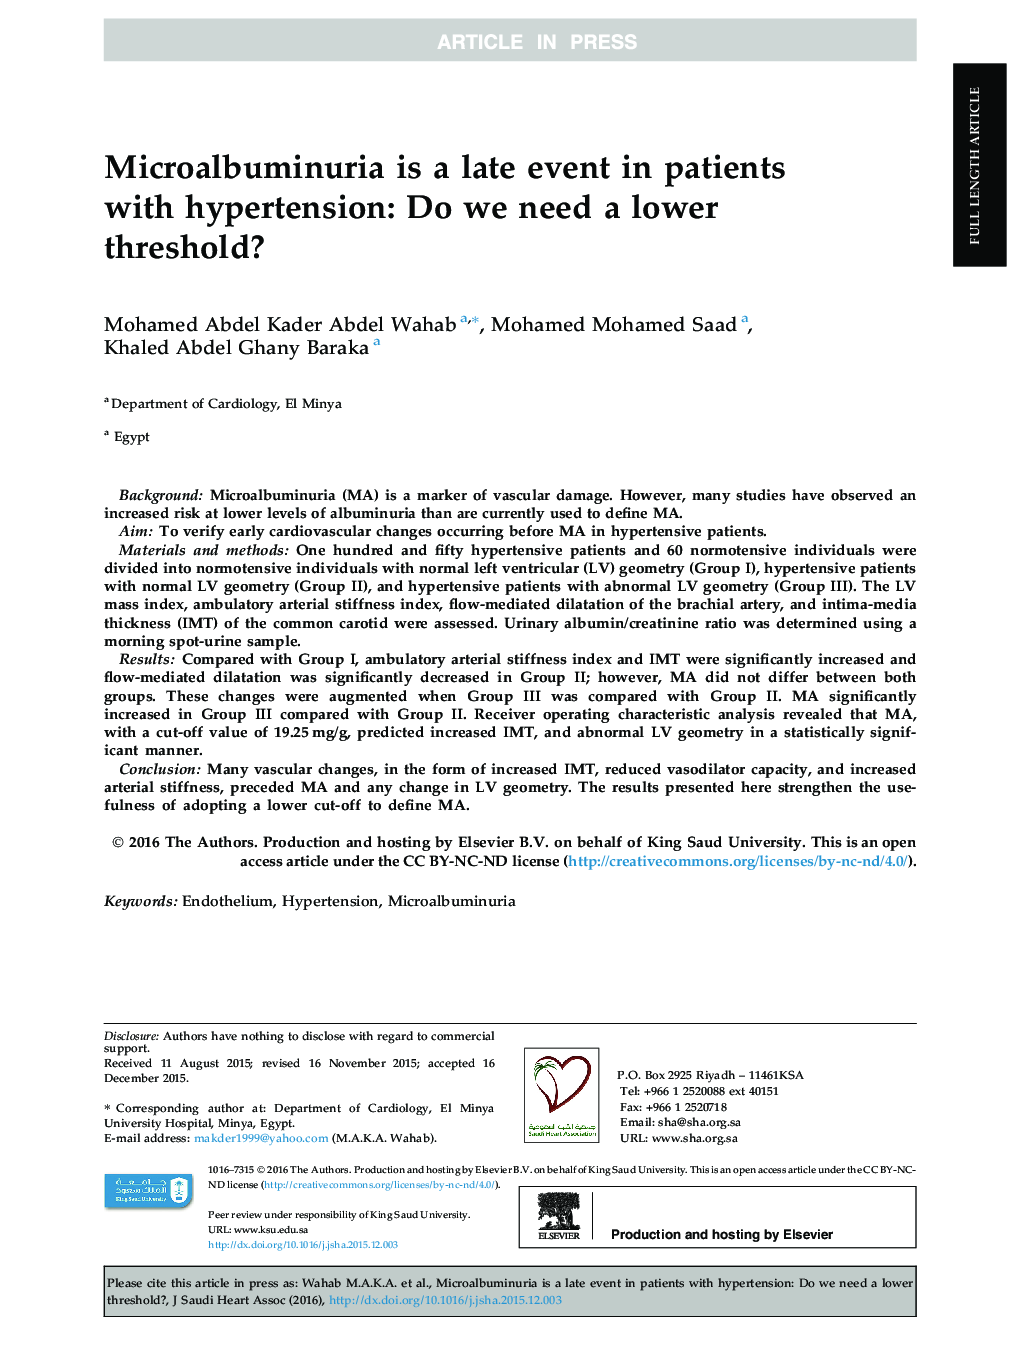 Microalbuminuria is a late event in patients with hypertension: Do we need a lower threshold?